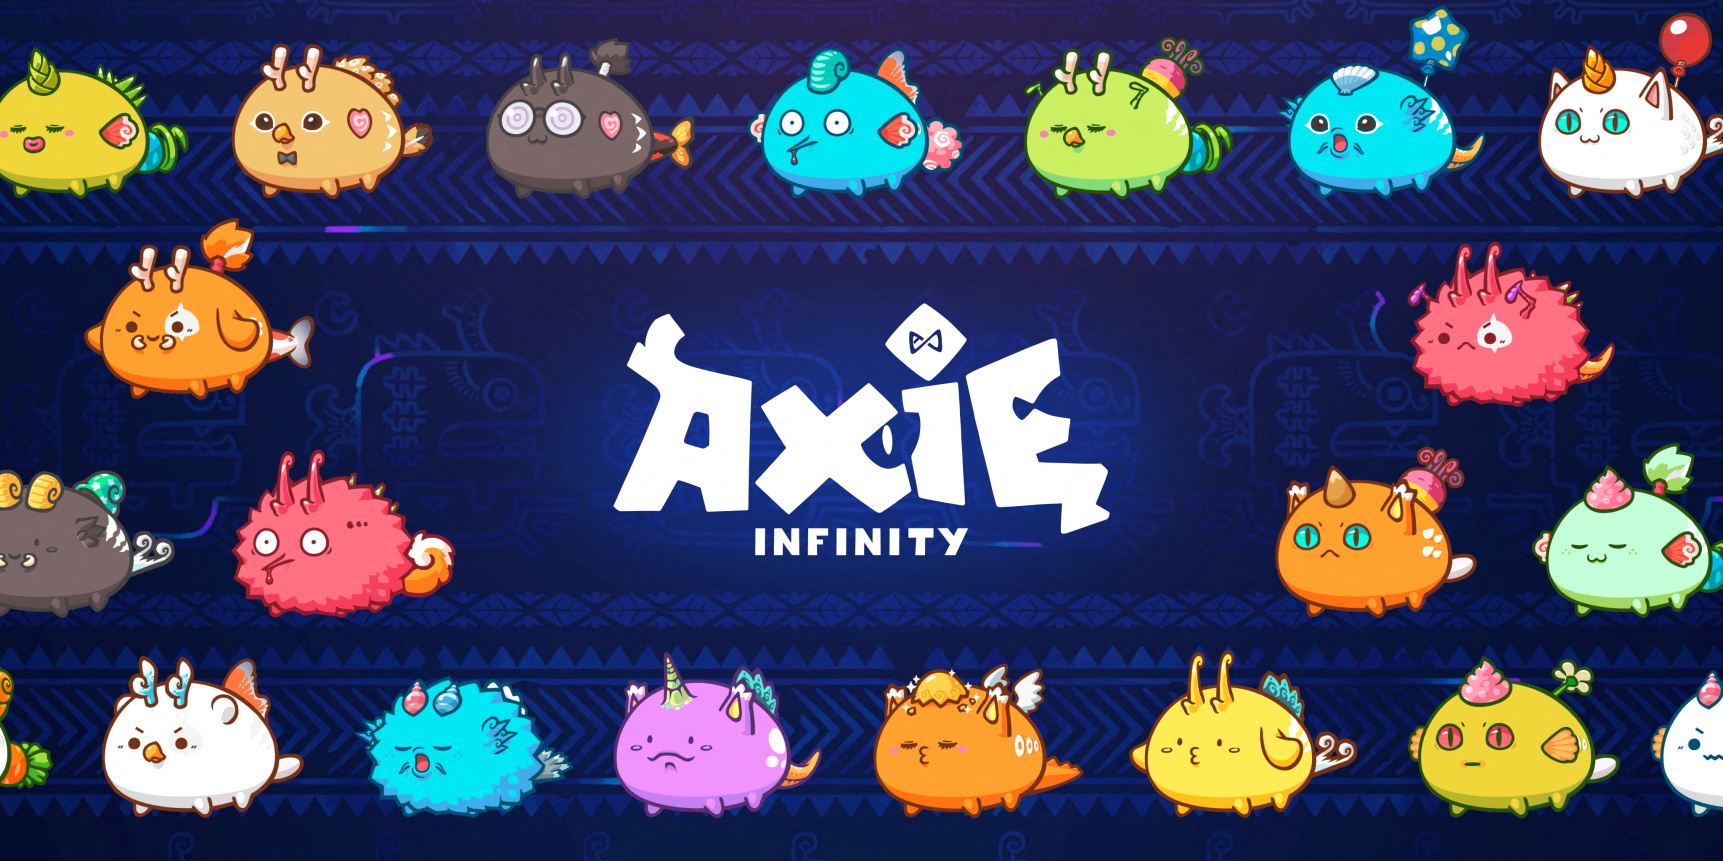 Handout image from the blockchain-based game Axie Infinity